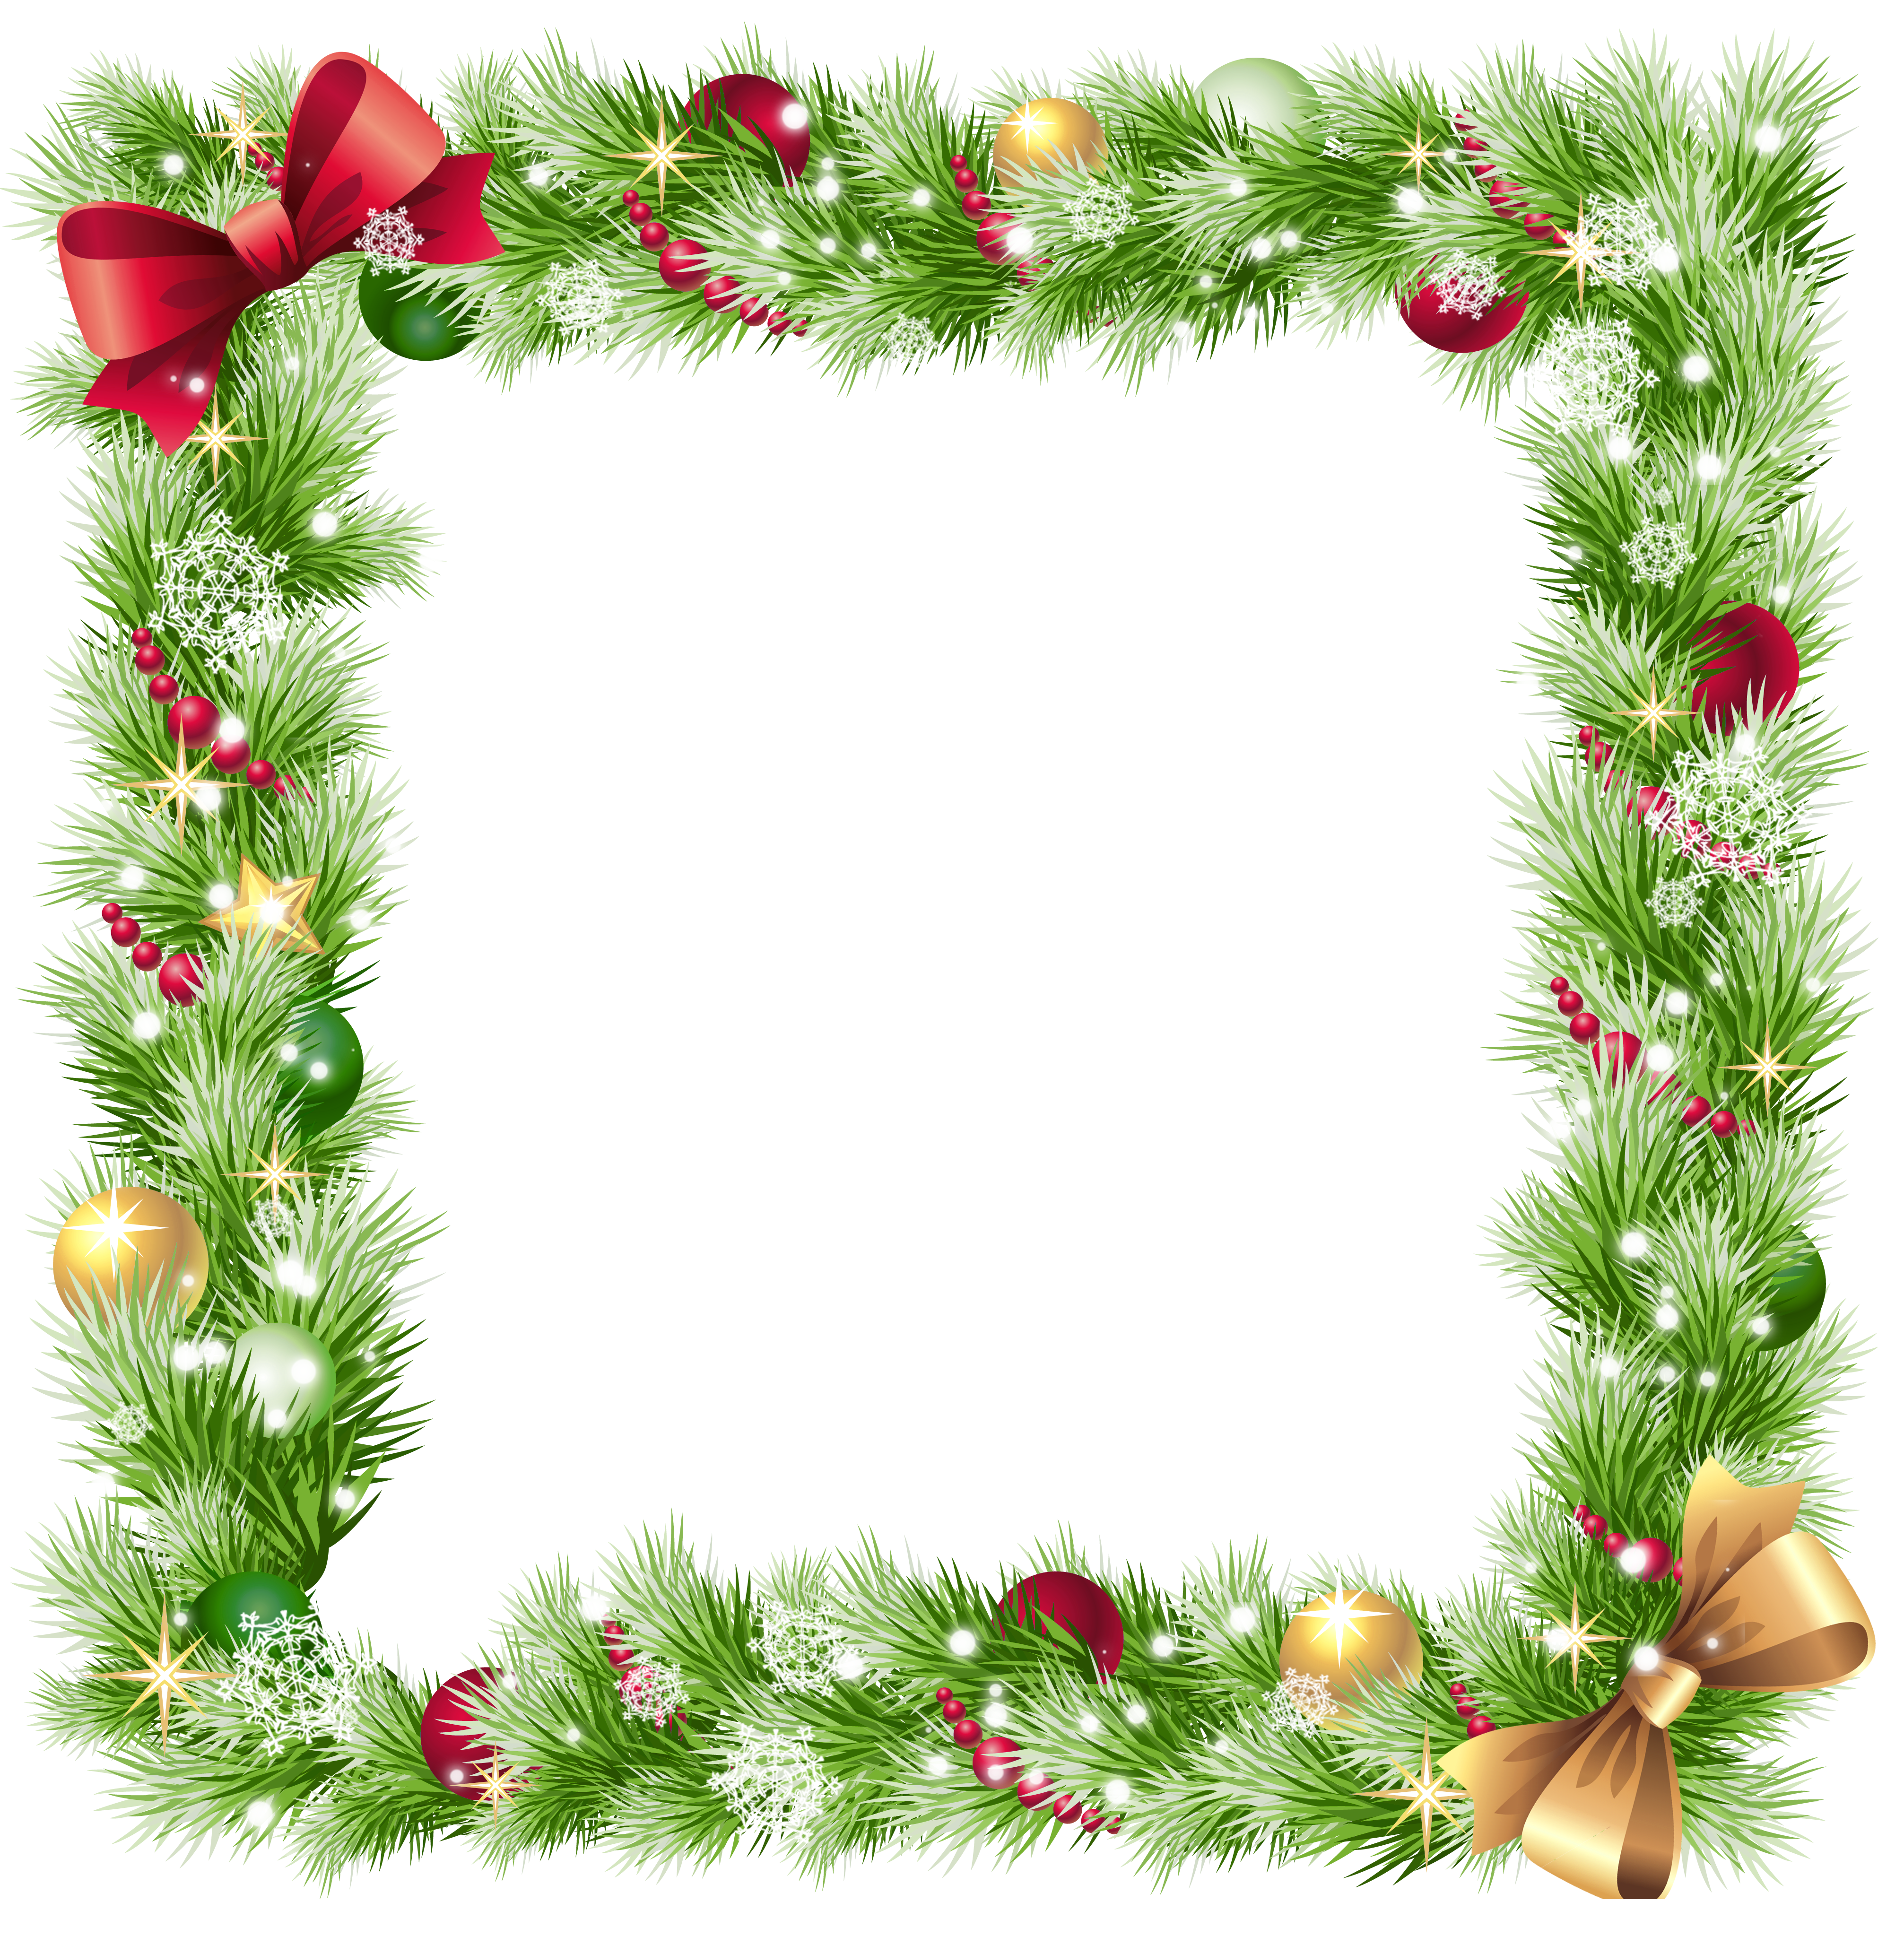 christmas-png-frame-with-ornaments-and-snowflakes-kar-csony-k-pkeret